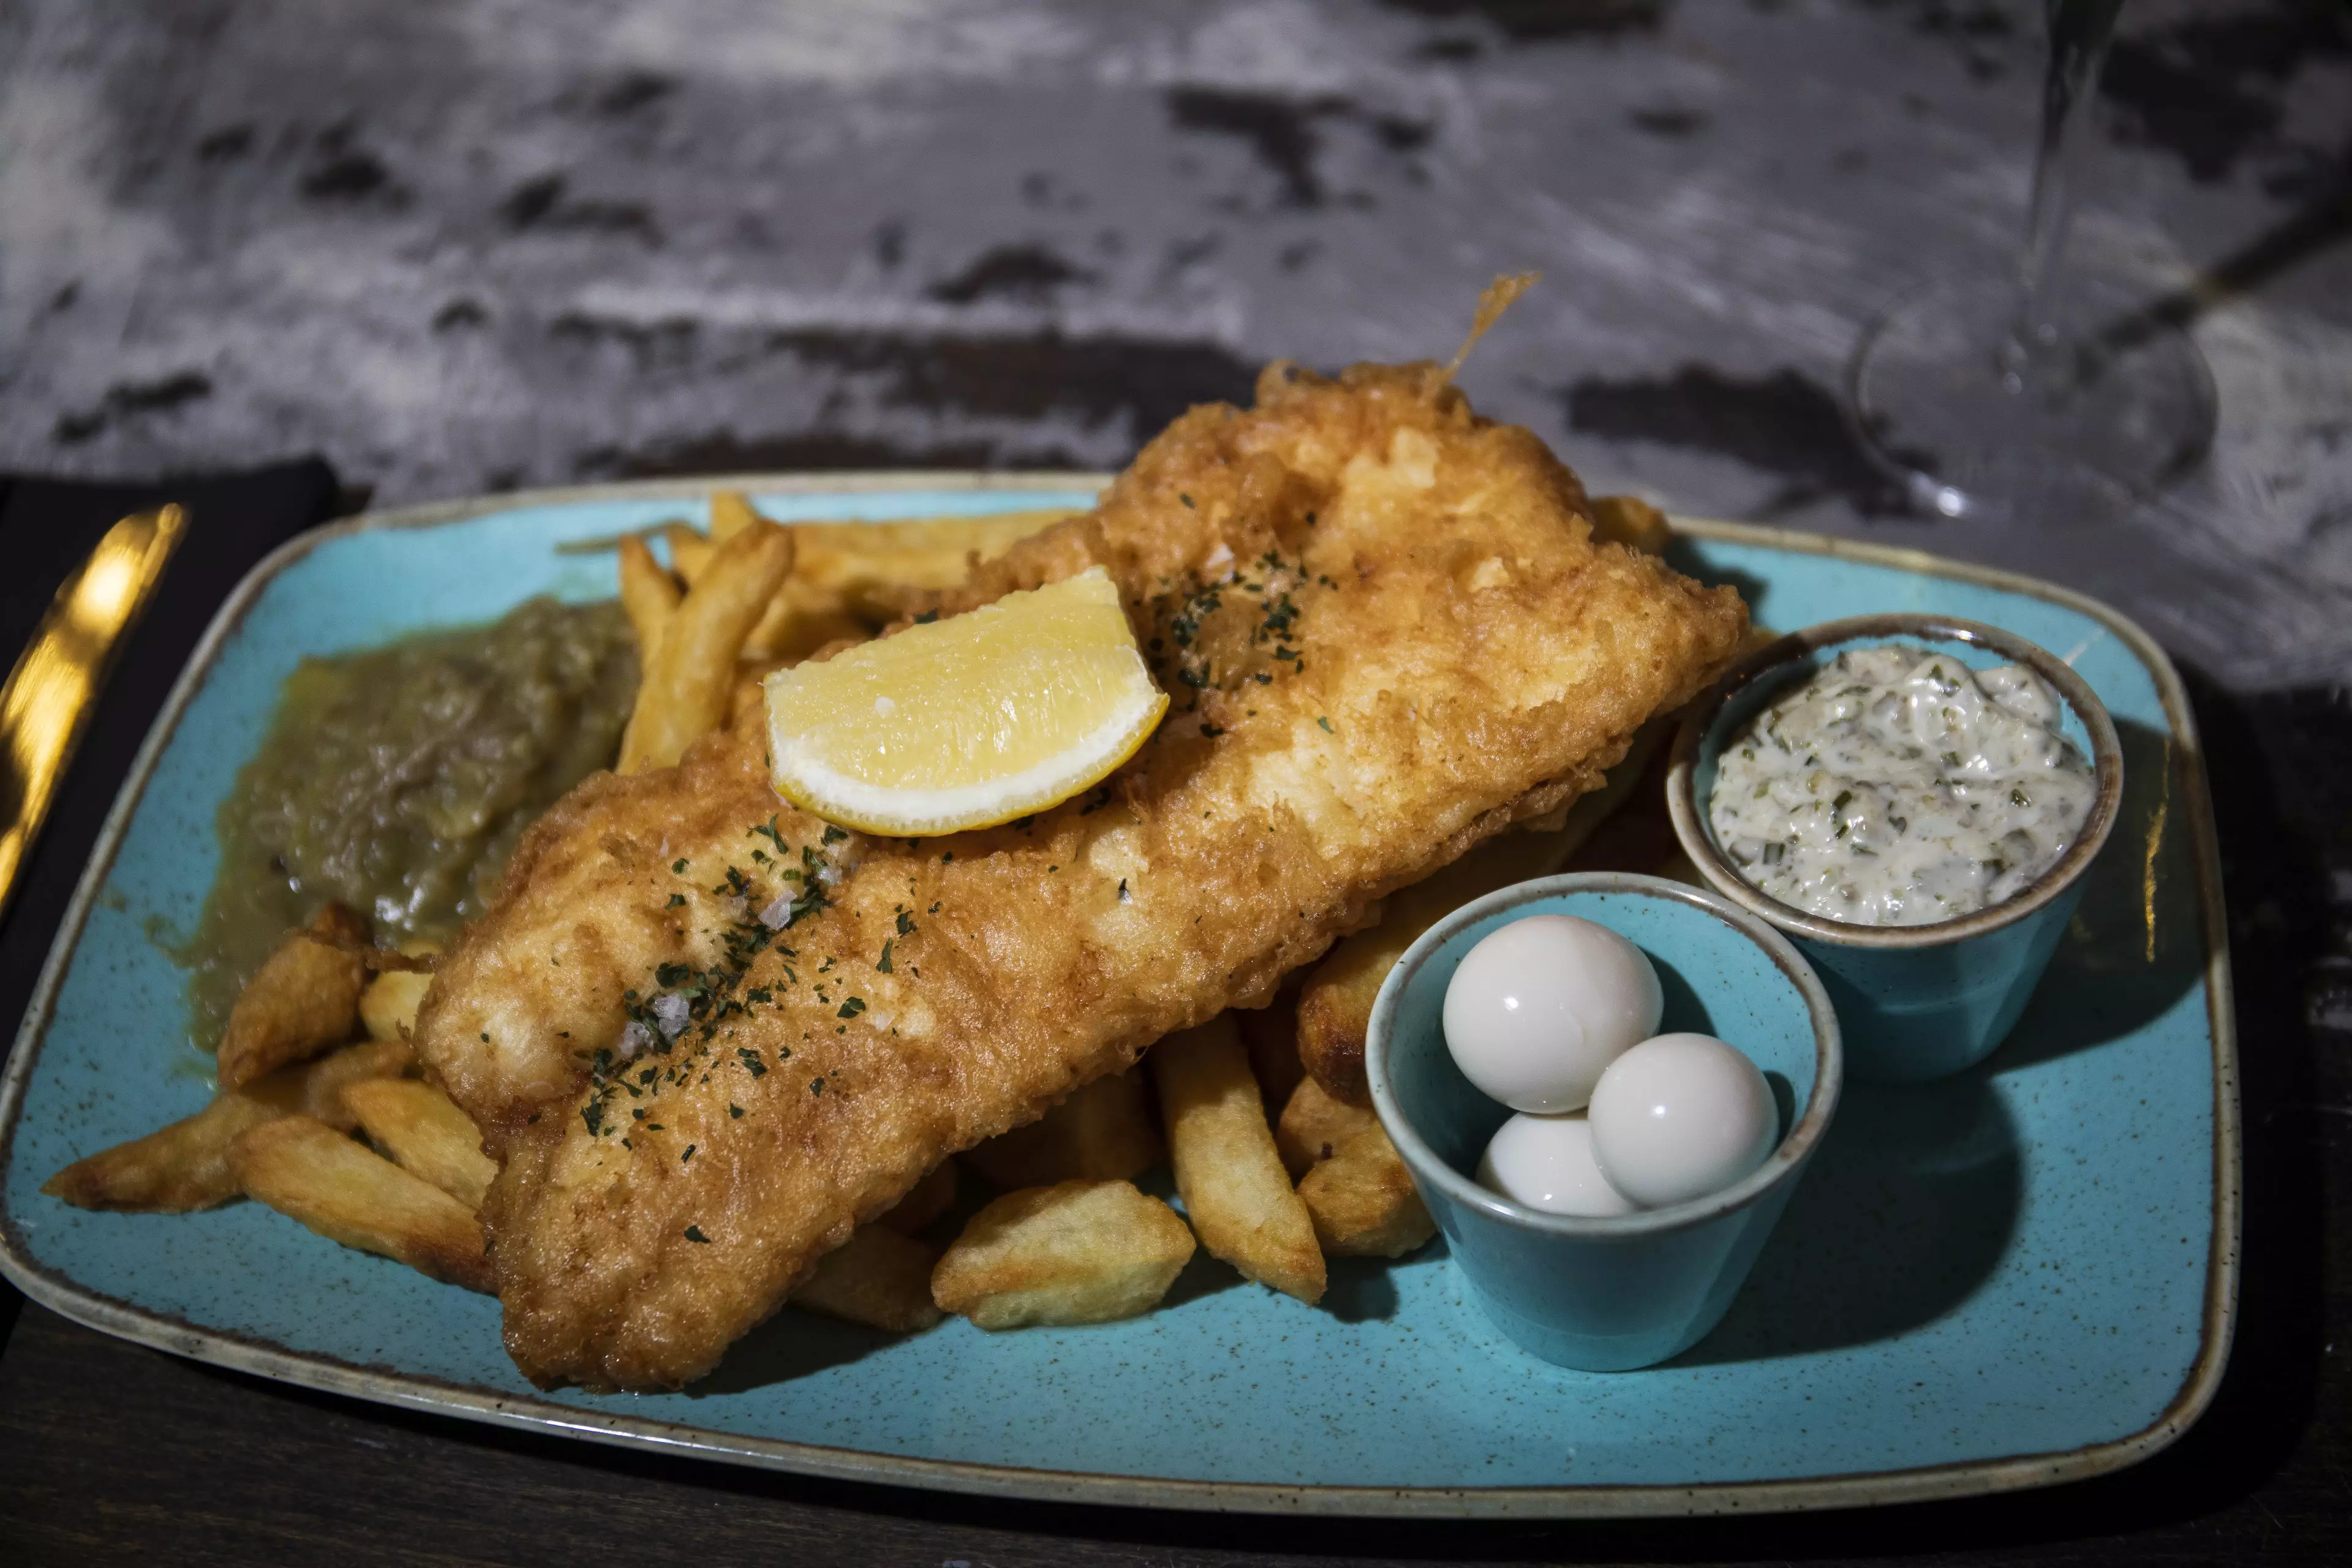 Fish and chips with a side of quail eggs preserved in champagne, anyone? (